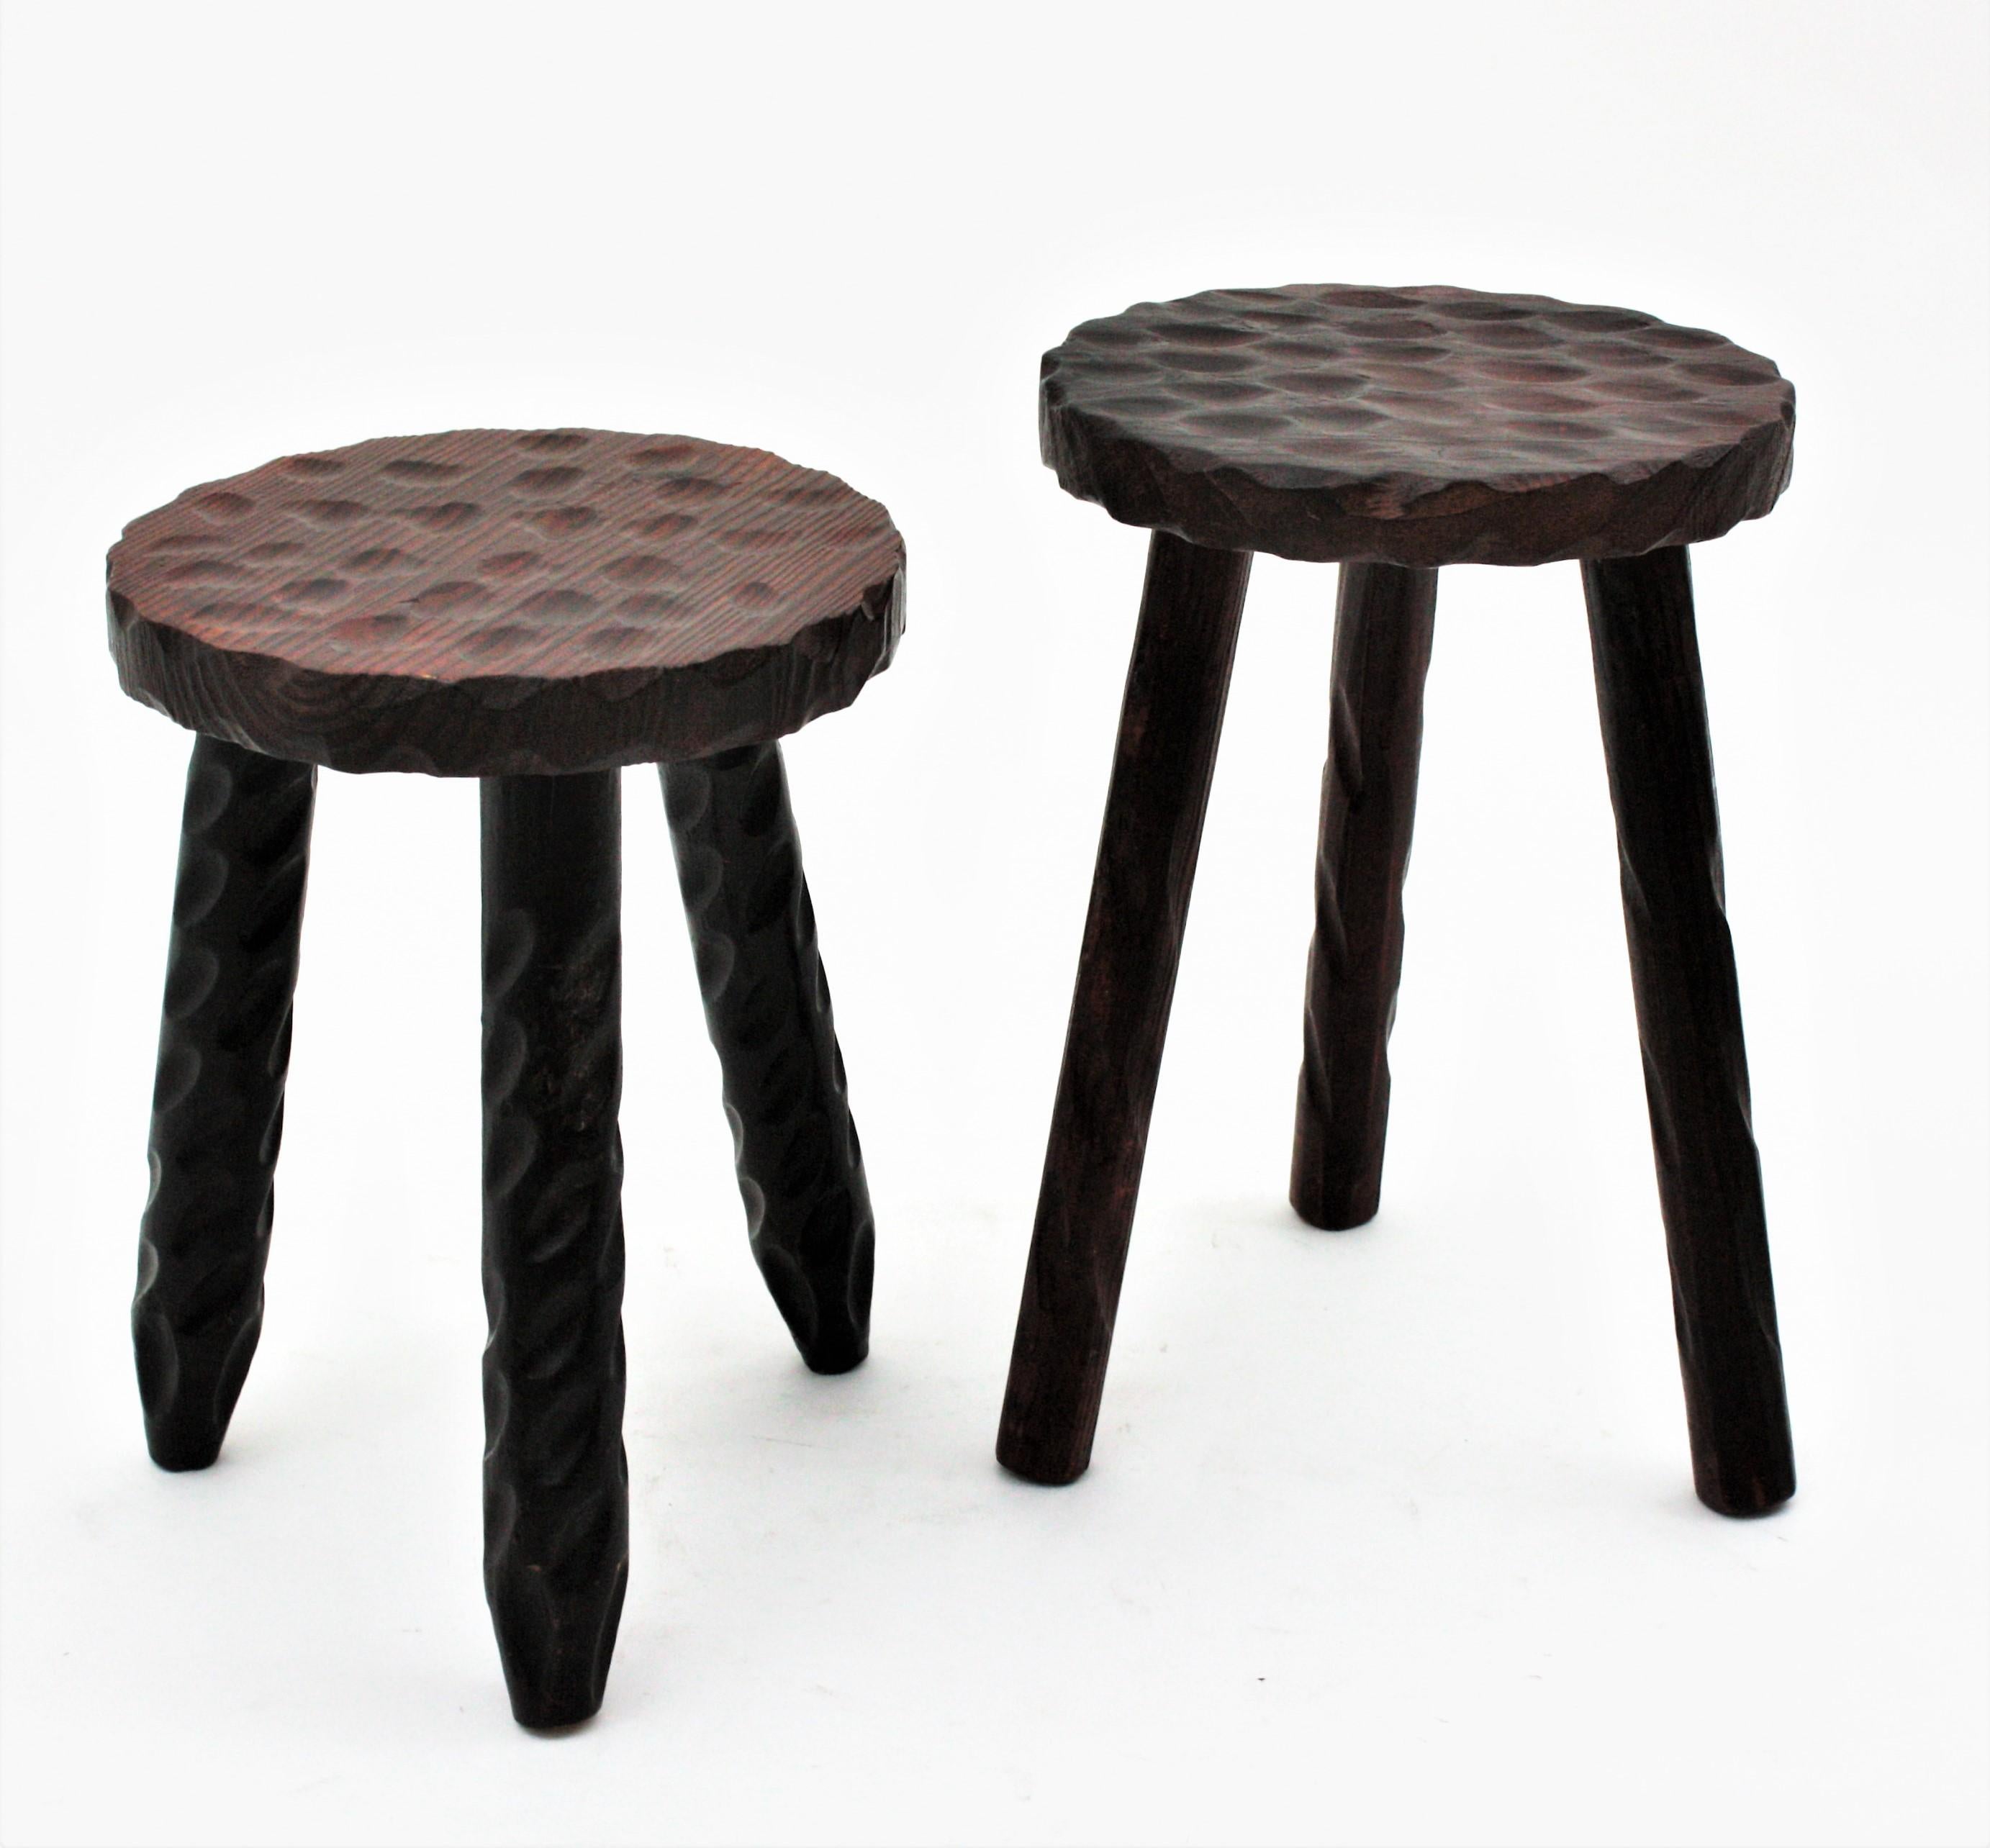 Hand-Crafted Pair of Spanish Colonial Tripod Stools in Carved Wood, 1940s For Sale